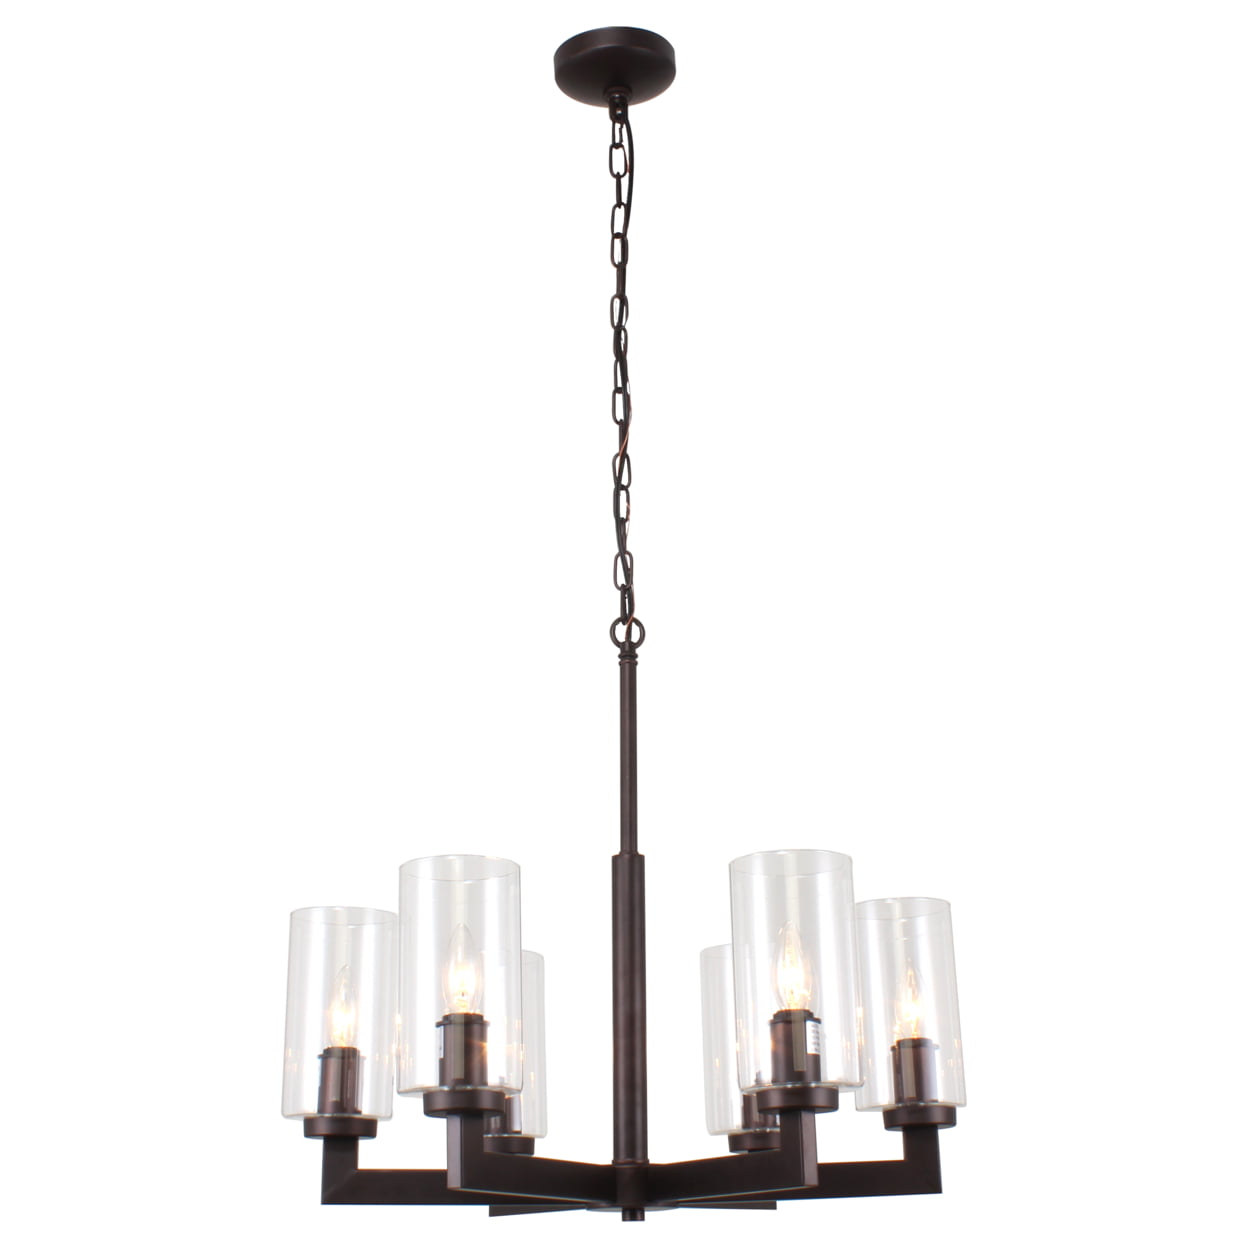 Ch7h019rb24-up6 Lula Farmhouse 6 Light Rubbed Bronze Ceiling Pendant - 23.5 In.